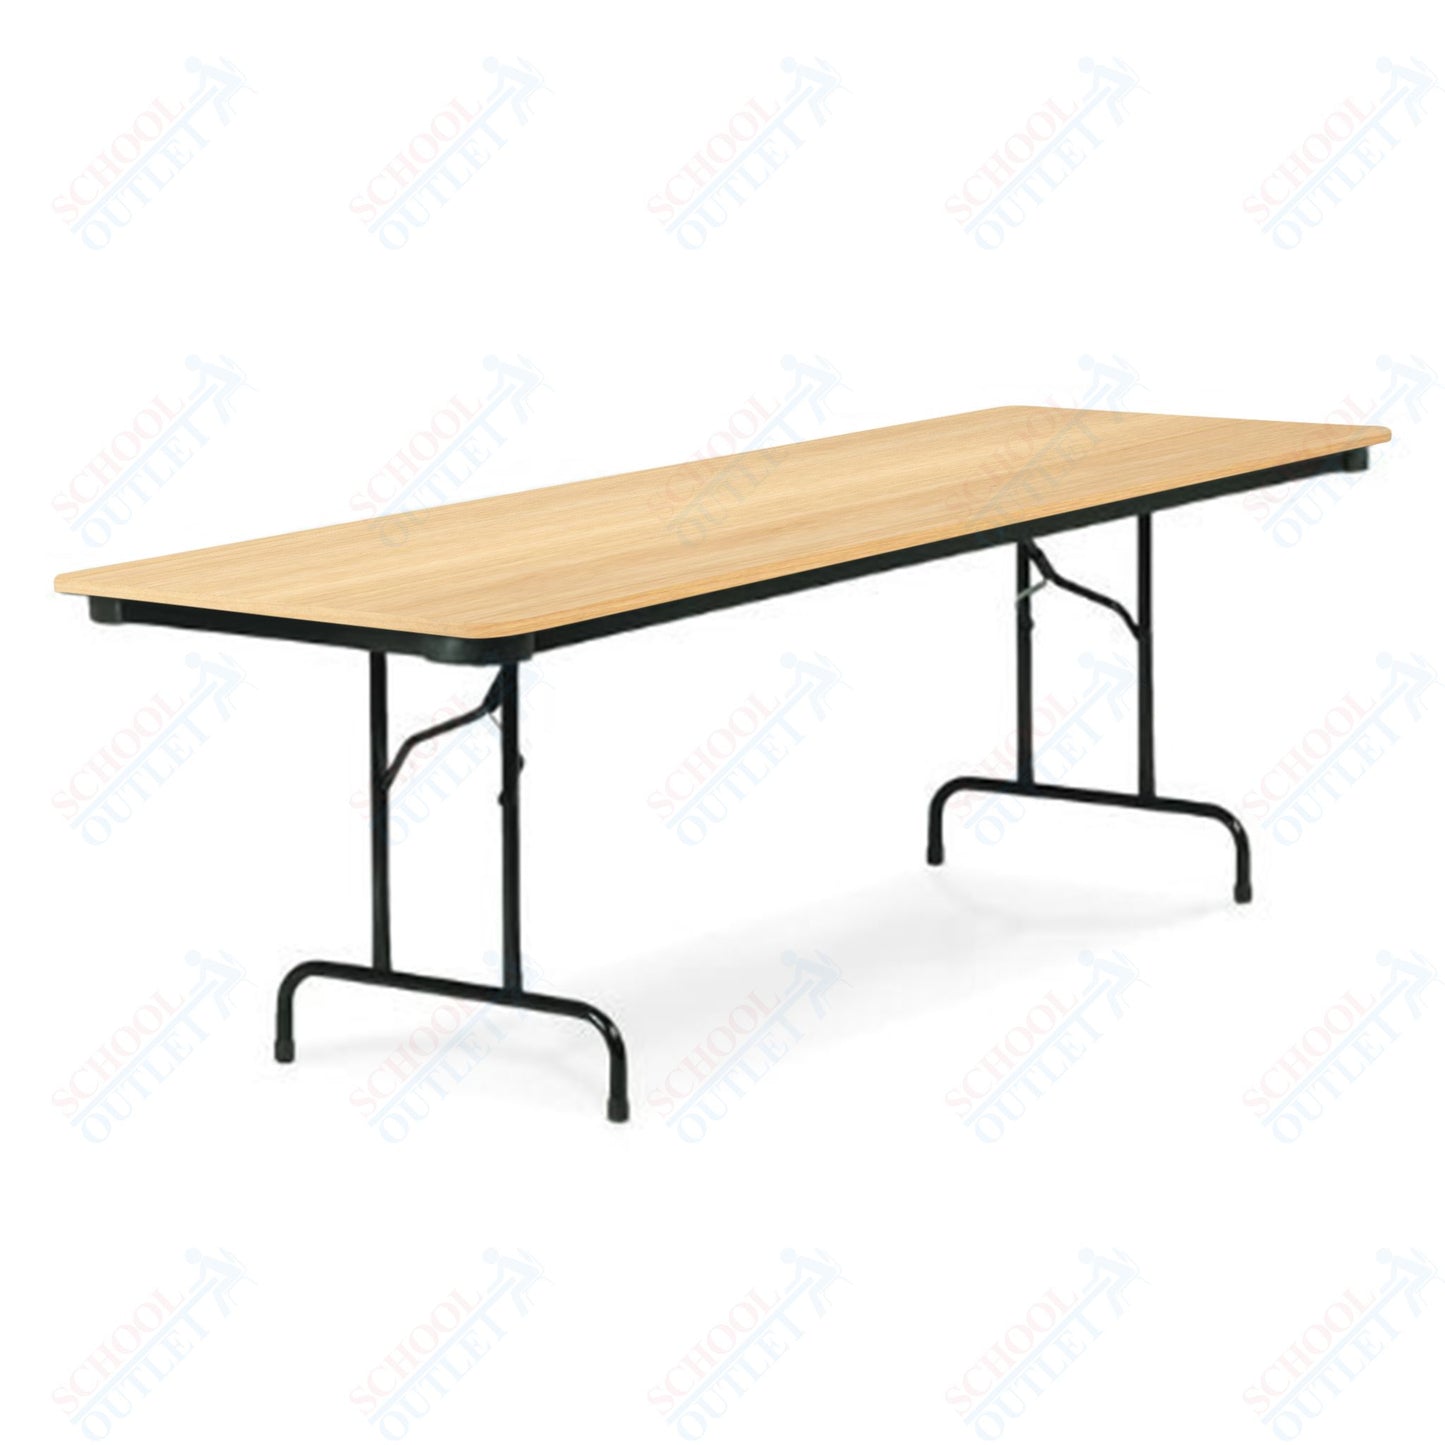 Virco 602448 - 6000 series 3/4" thick particle board folding table 24" x 48"